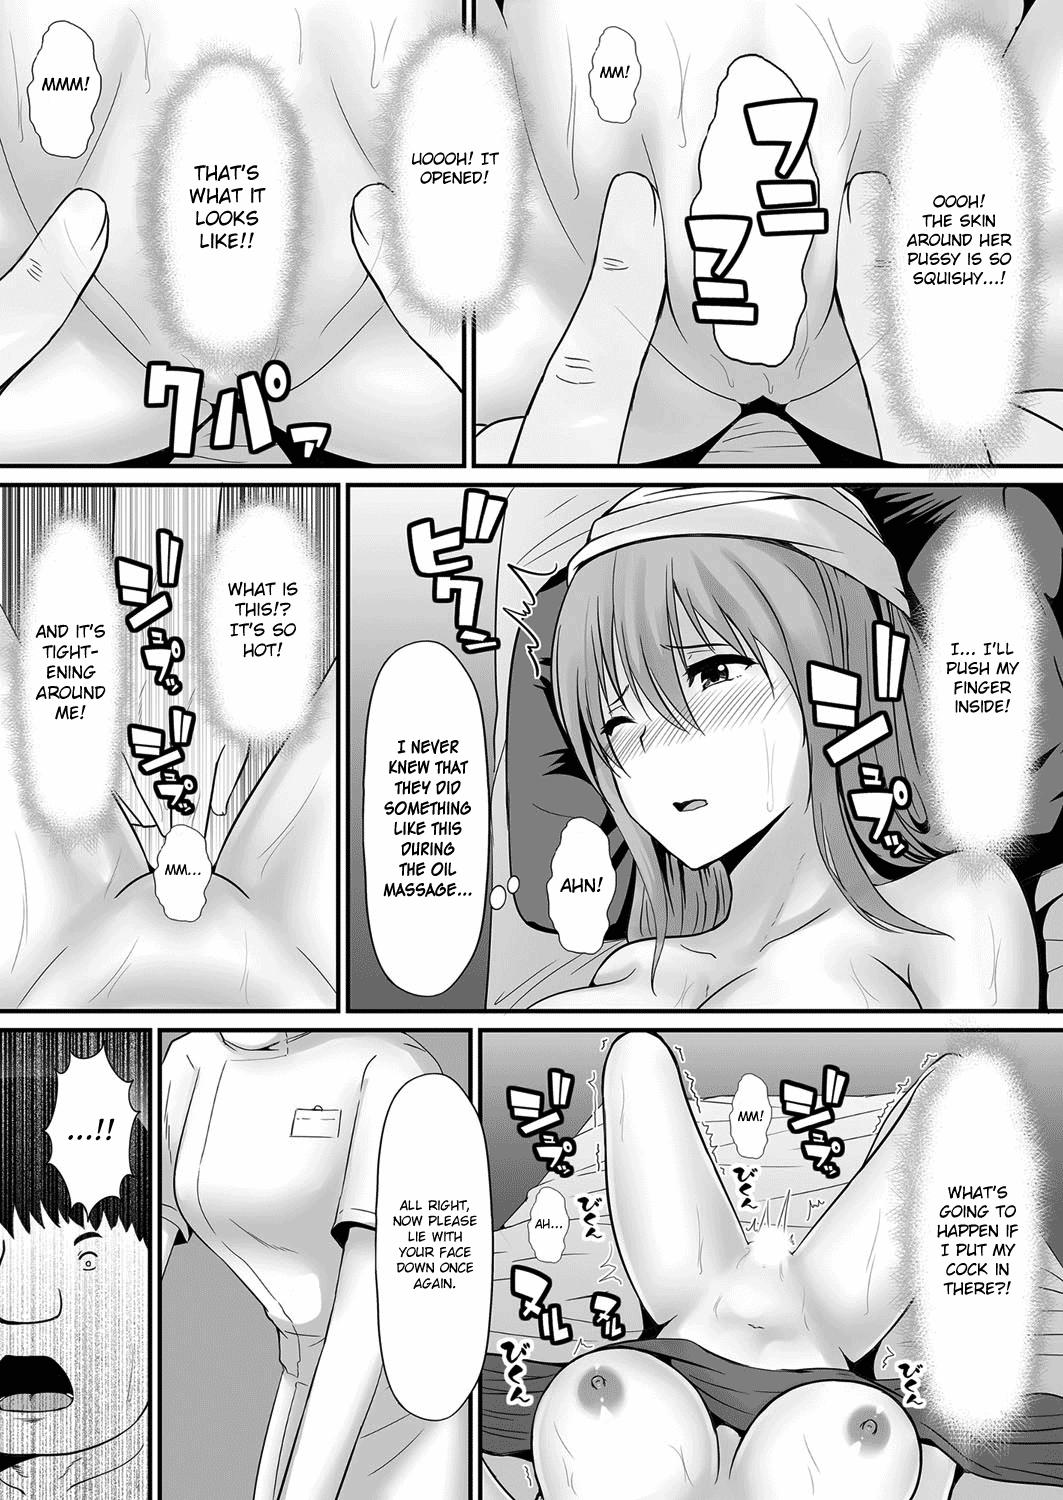 For Ecchi na Hatsumei de... Mechakucha Sex Shitemita! 1 | I Used Perverted Inventions... To Have Crazy Sex! 1 Licking Pussy - Page 11